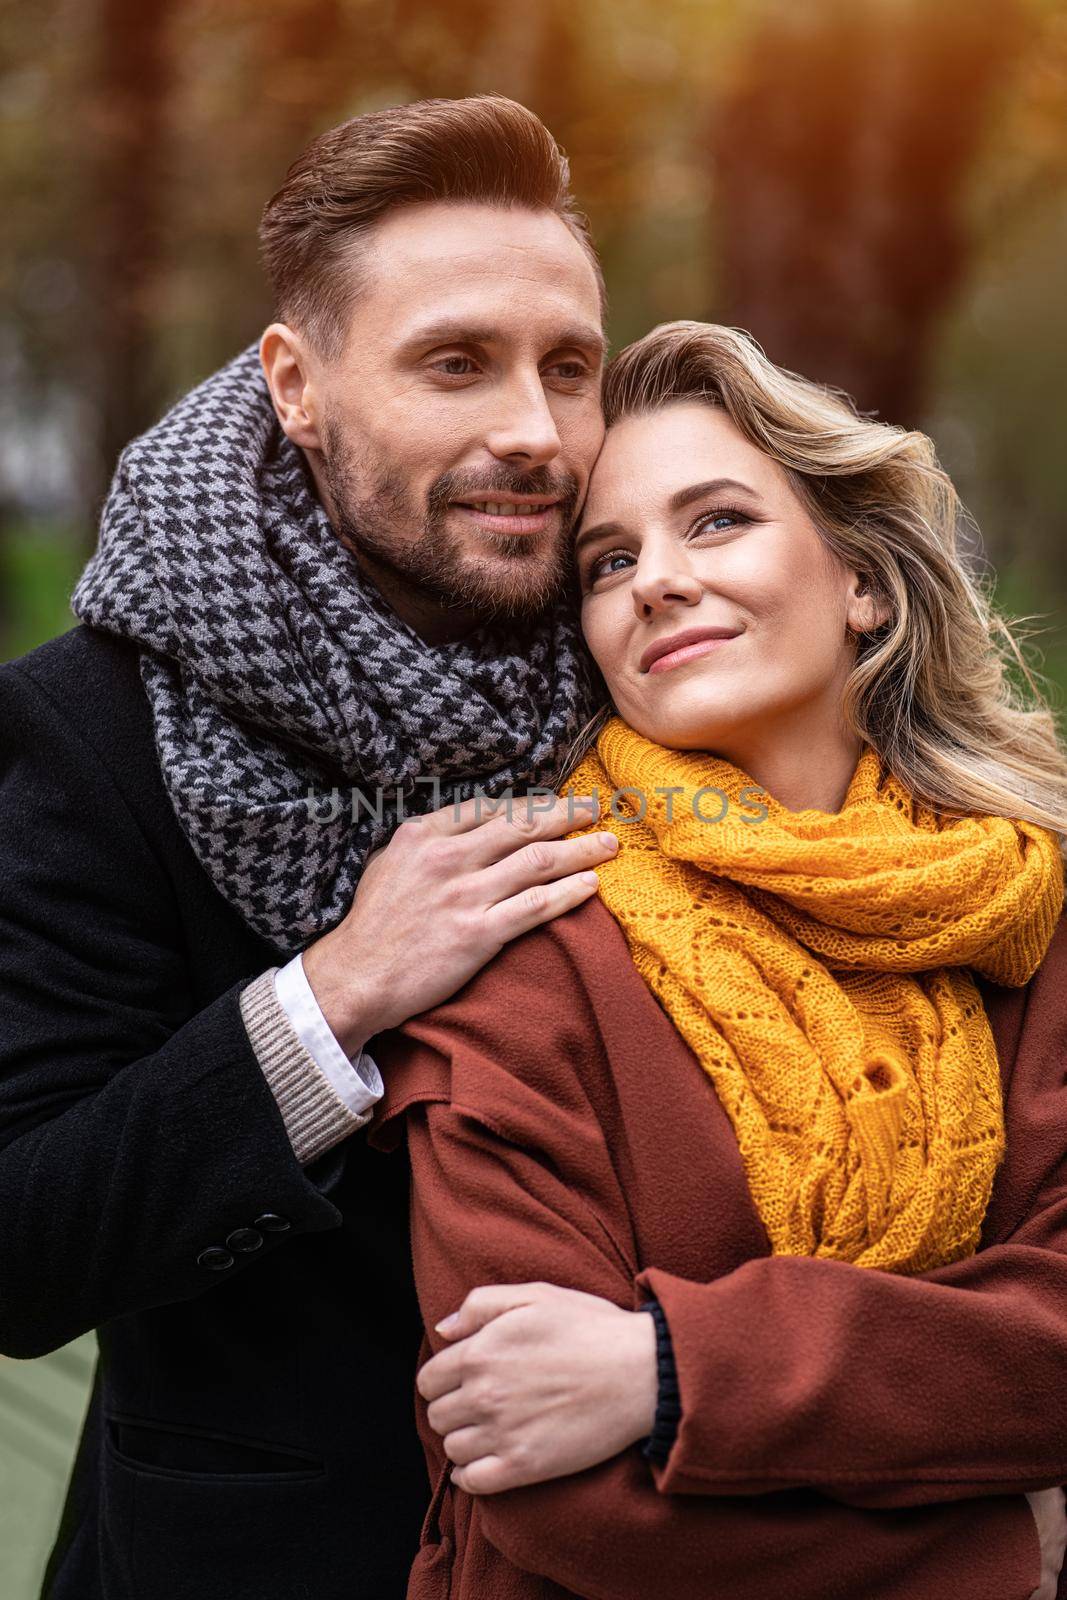 Tenderness of a cute couple. Handsome man and a woman hugged from behind smile looking at each other in the autumn park. Outdoor shot of a young couple in love having great time.